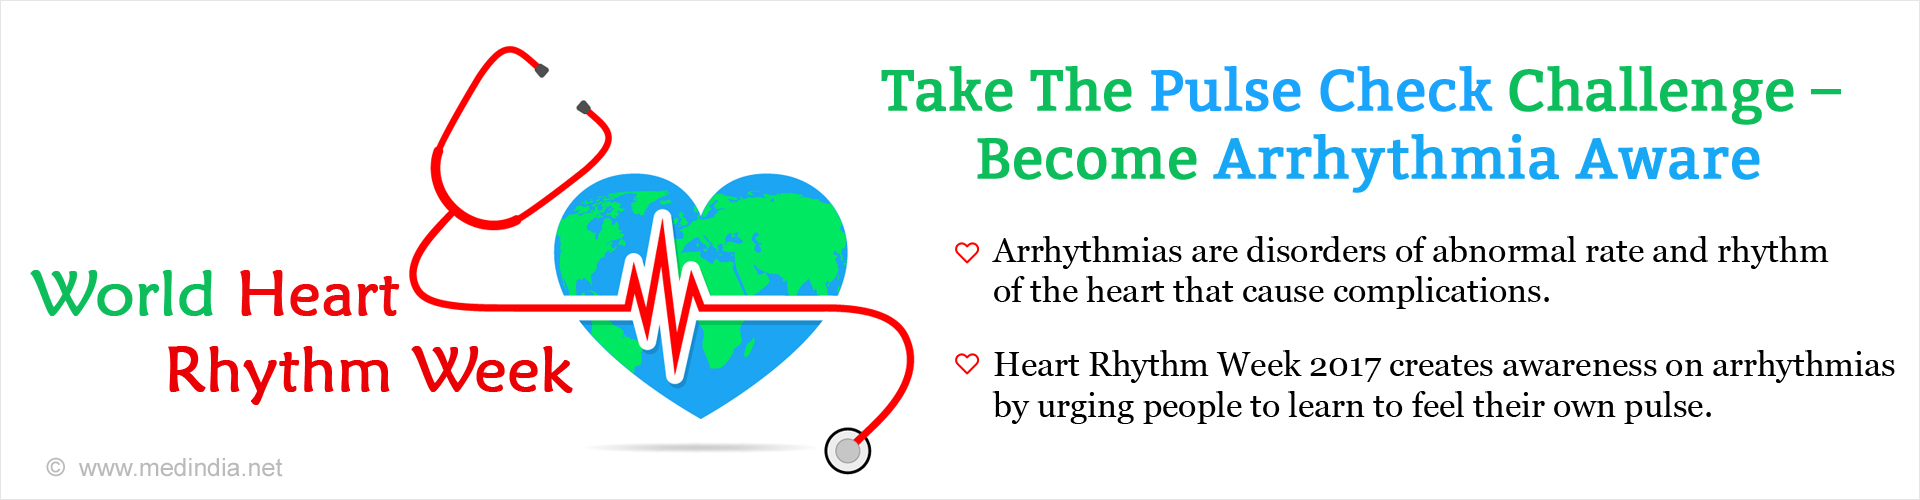 Take the Pulse Check Challenge -Become Arrhythmia Aware
- Arrhythmias are disorders of abnormal rate and rhythm of the heart that cause complications
- Heart Rhythm Week 2017 creates awareness on arrhythmias by urging people to learn to feel their own pulse